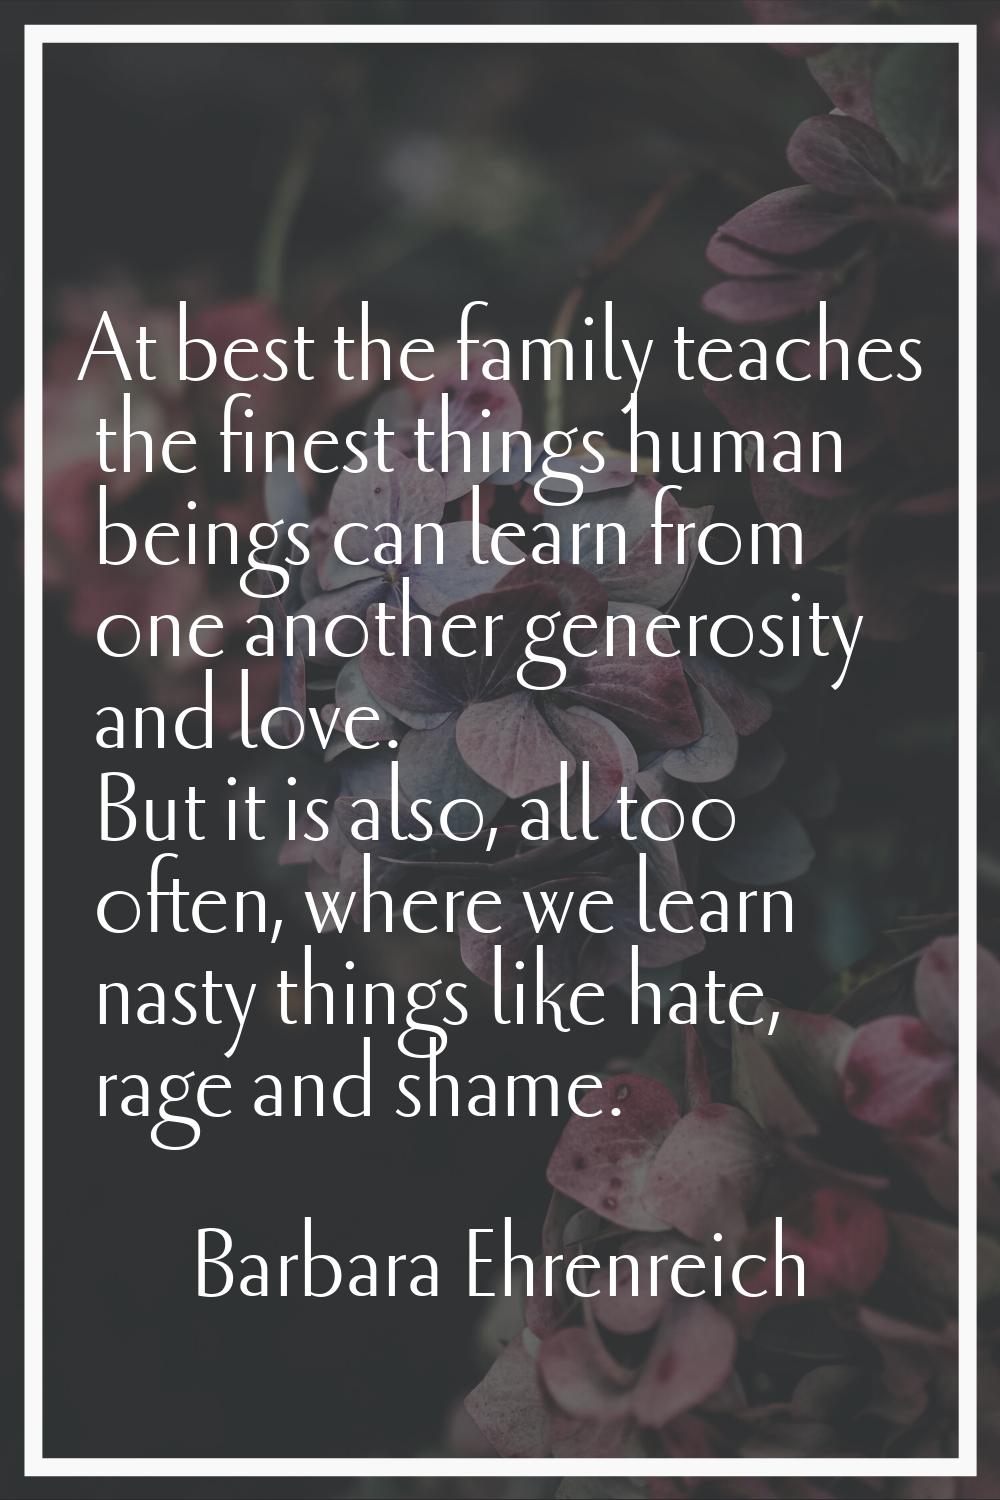 At best the family teaches the finest things human beings can learn from one another generosity and